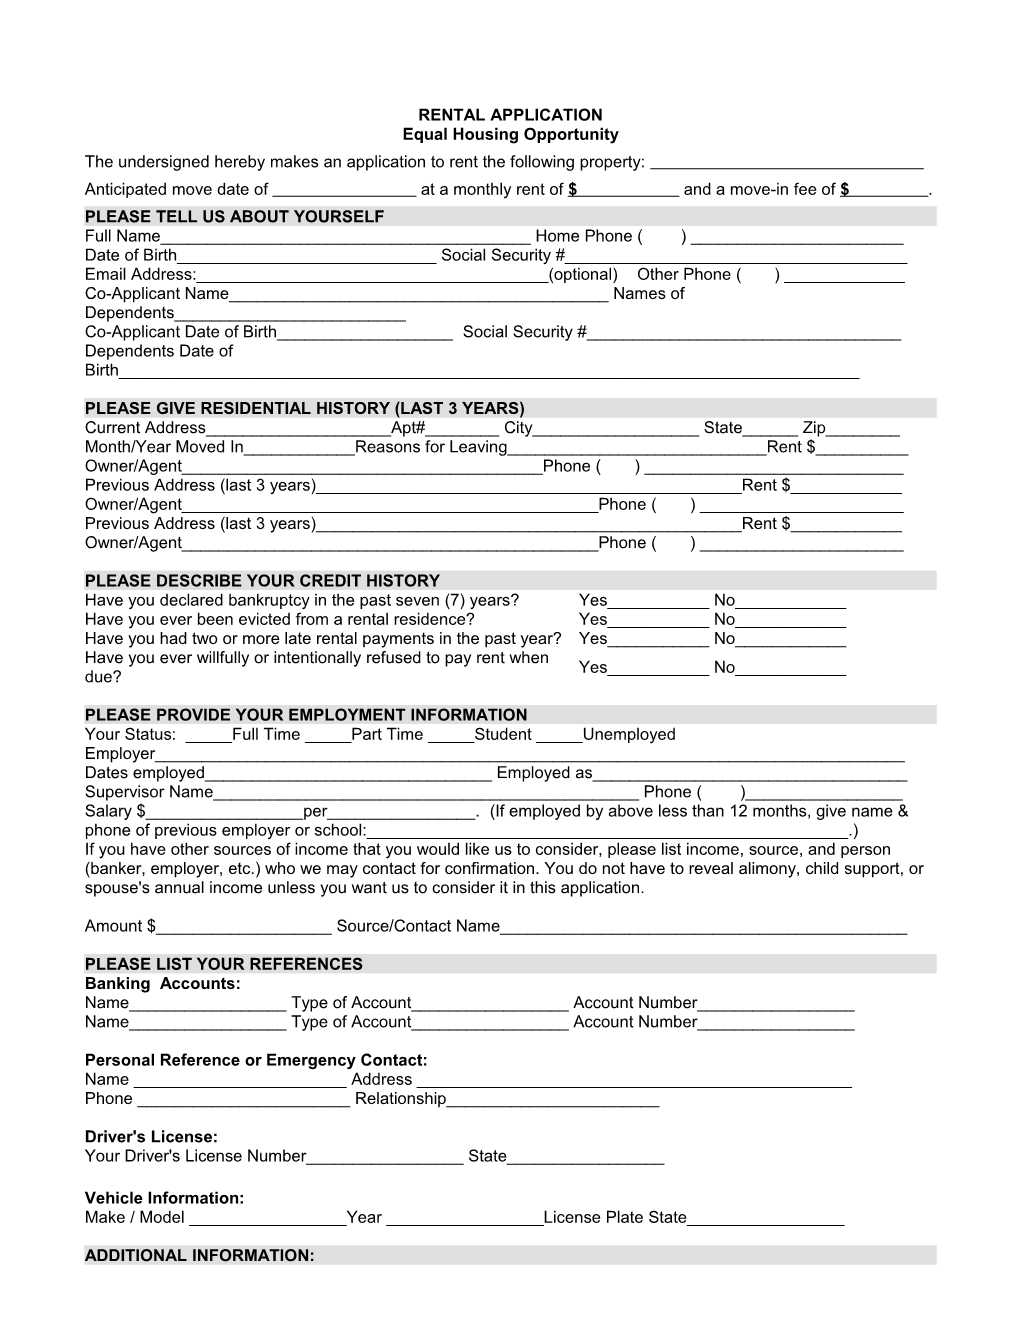 RENTAL APPLICATION Equal Housing Opportunity s1